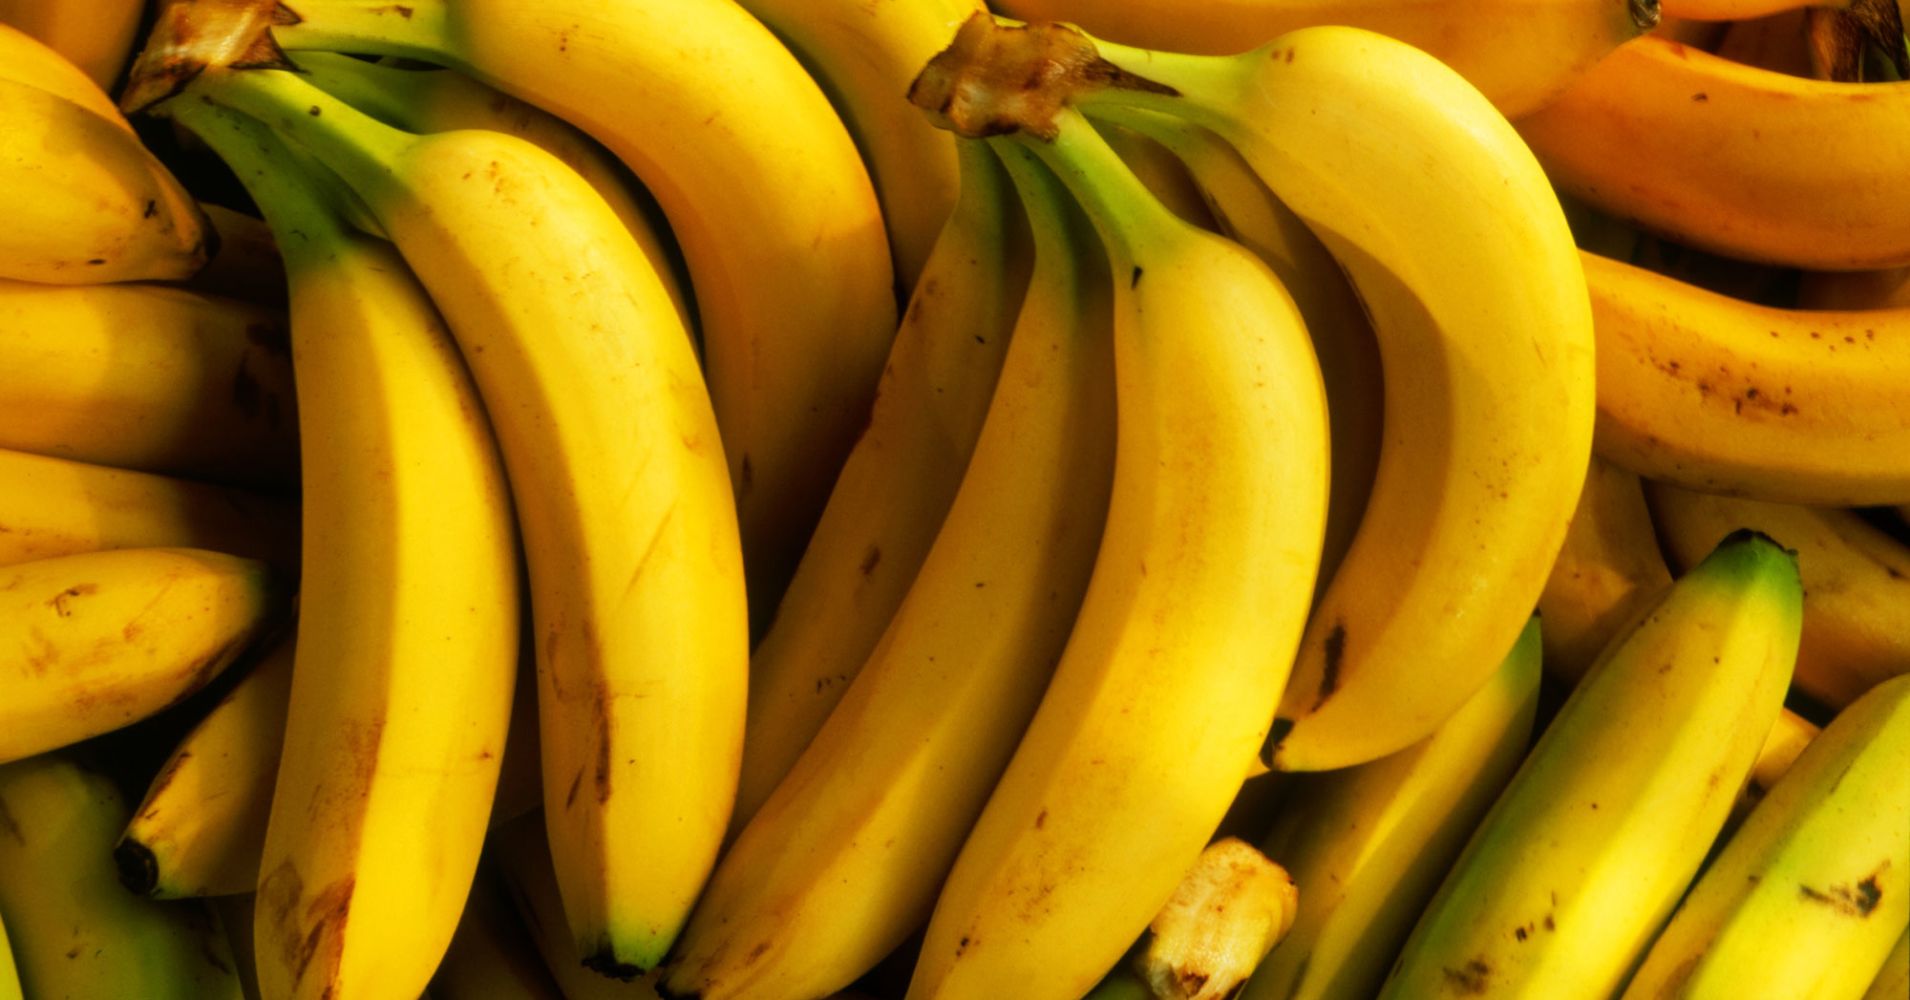 The banana industry is under threat because of Panama disease